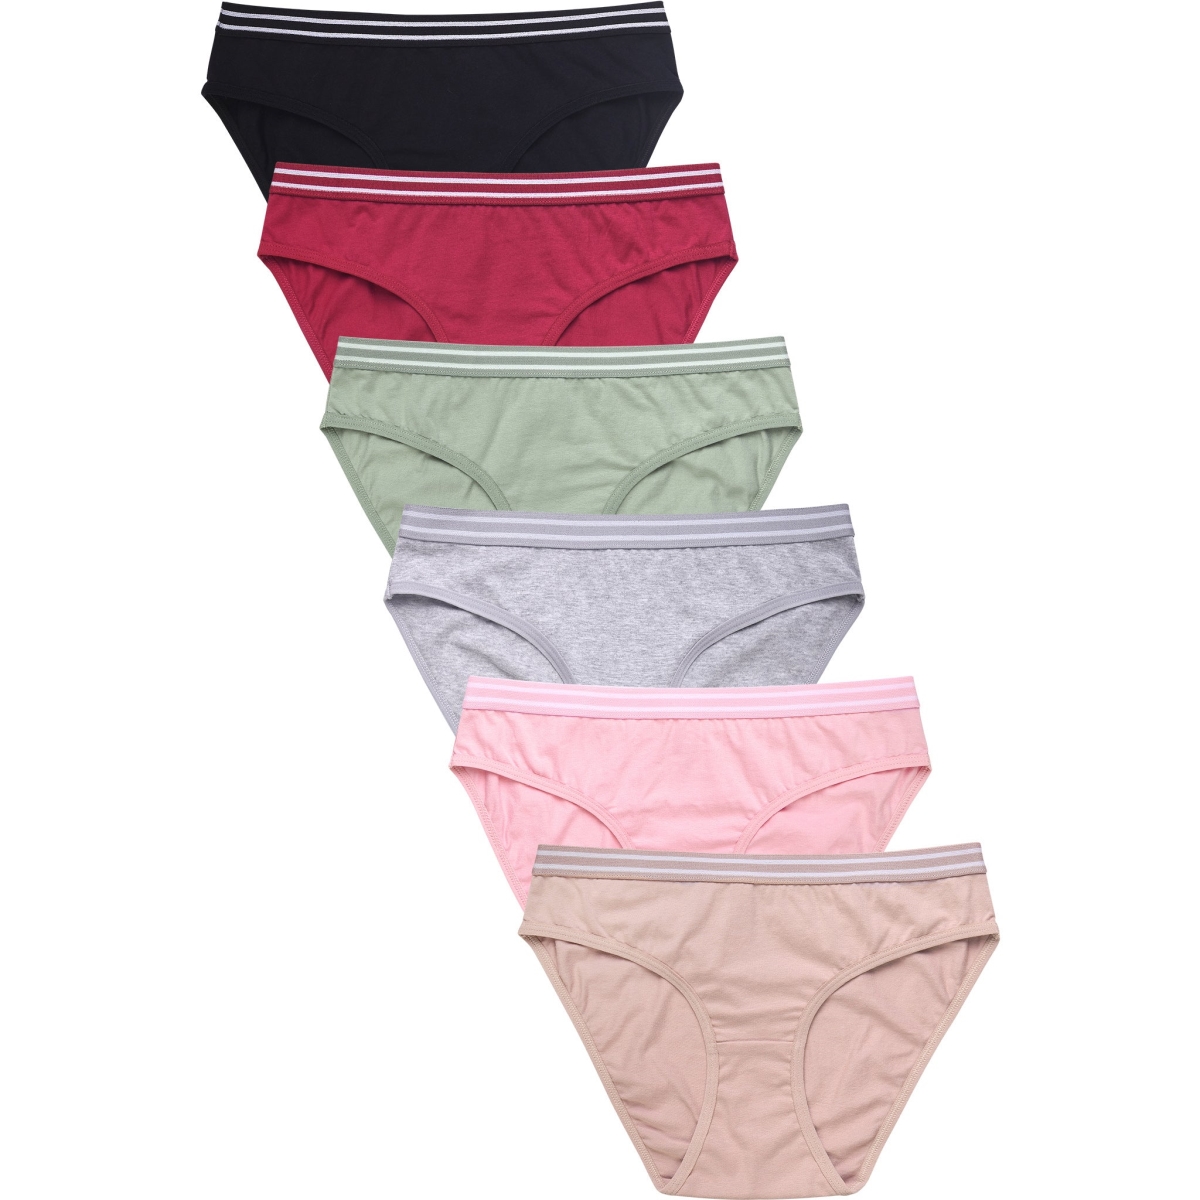 Picture of 247 Frenzy 247-LP1361CK4-XL Sofra Womens Essentials Cotton Stretch Bikini Panty Underwear - Assorted Color - Extra Large - Pack of 6